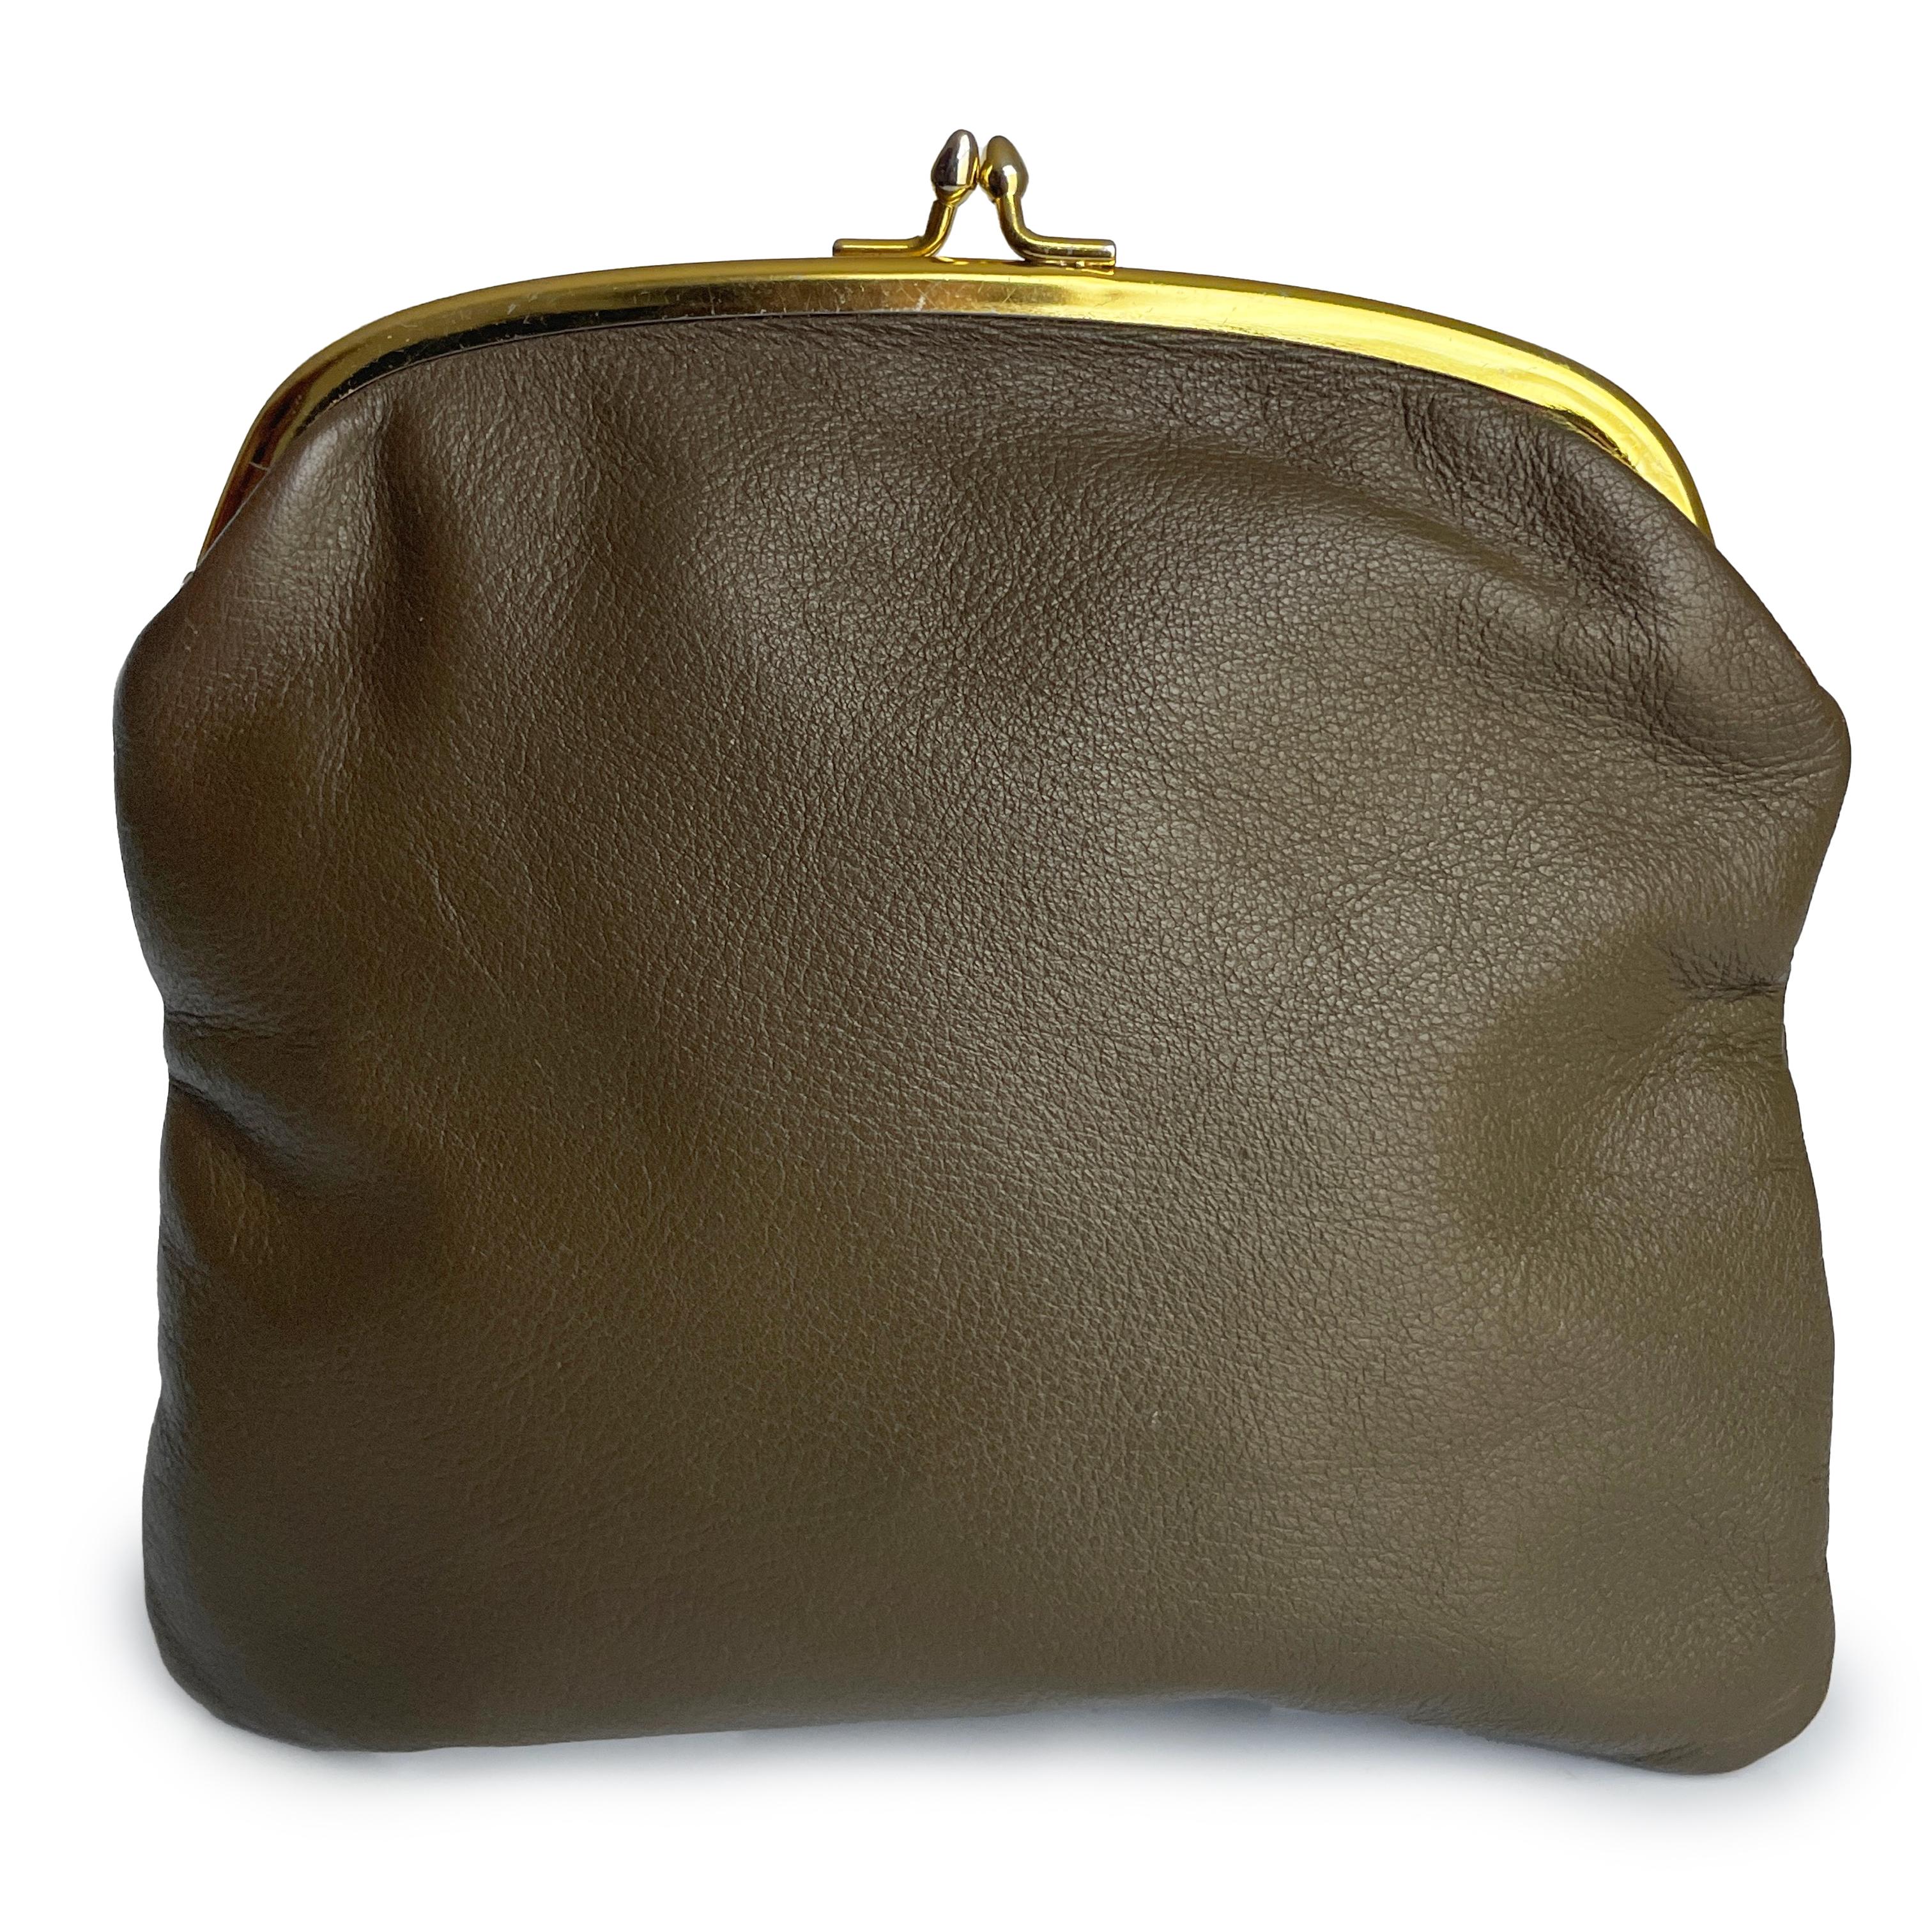 Bonnie Cashin for Coach 'foldover purse' or clutch bag, part of Bonnie's Cashin Carry accessories collection and likely made in the late 1960s.  Made from a mocha-hued leather, this fabulous little bag fastens with a gold metal kiss lock and is